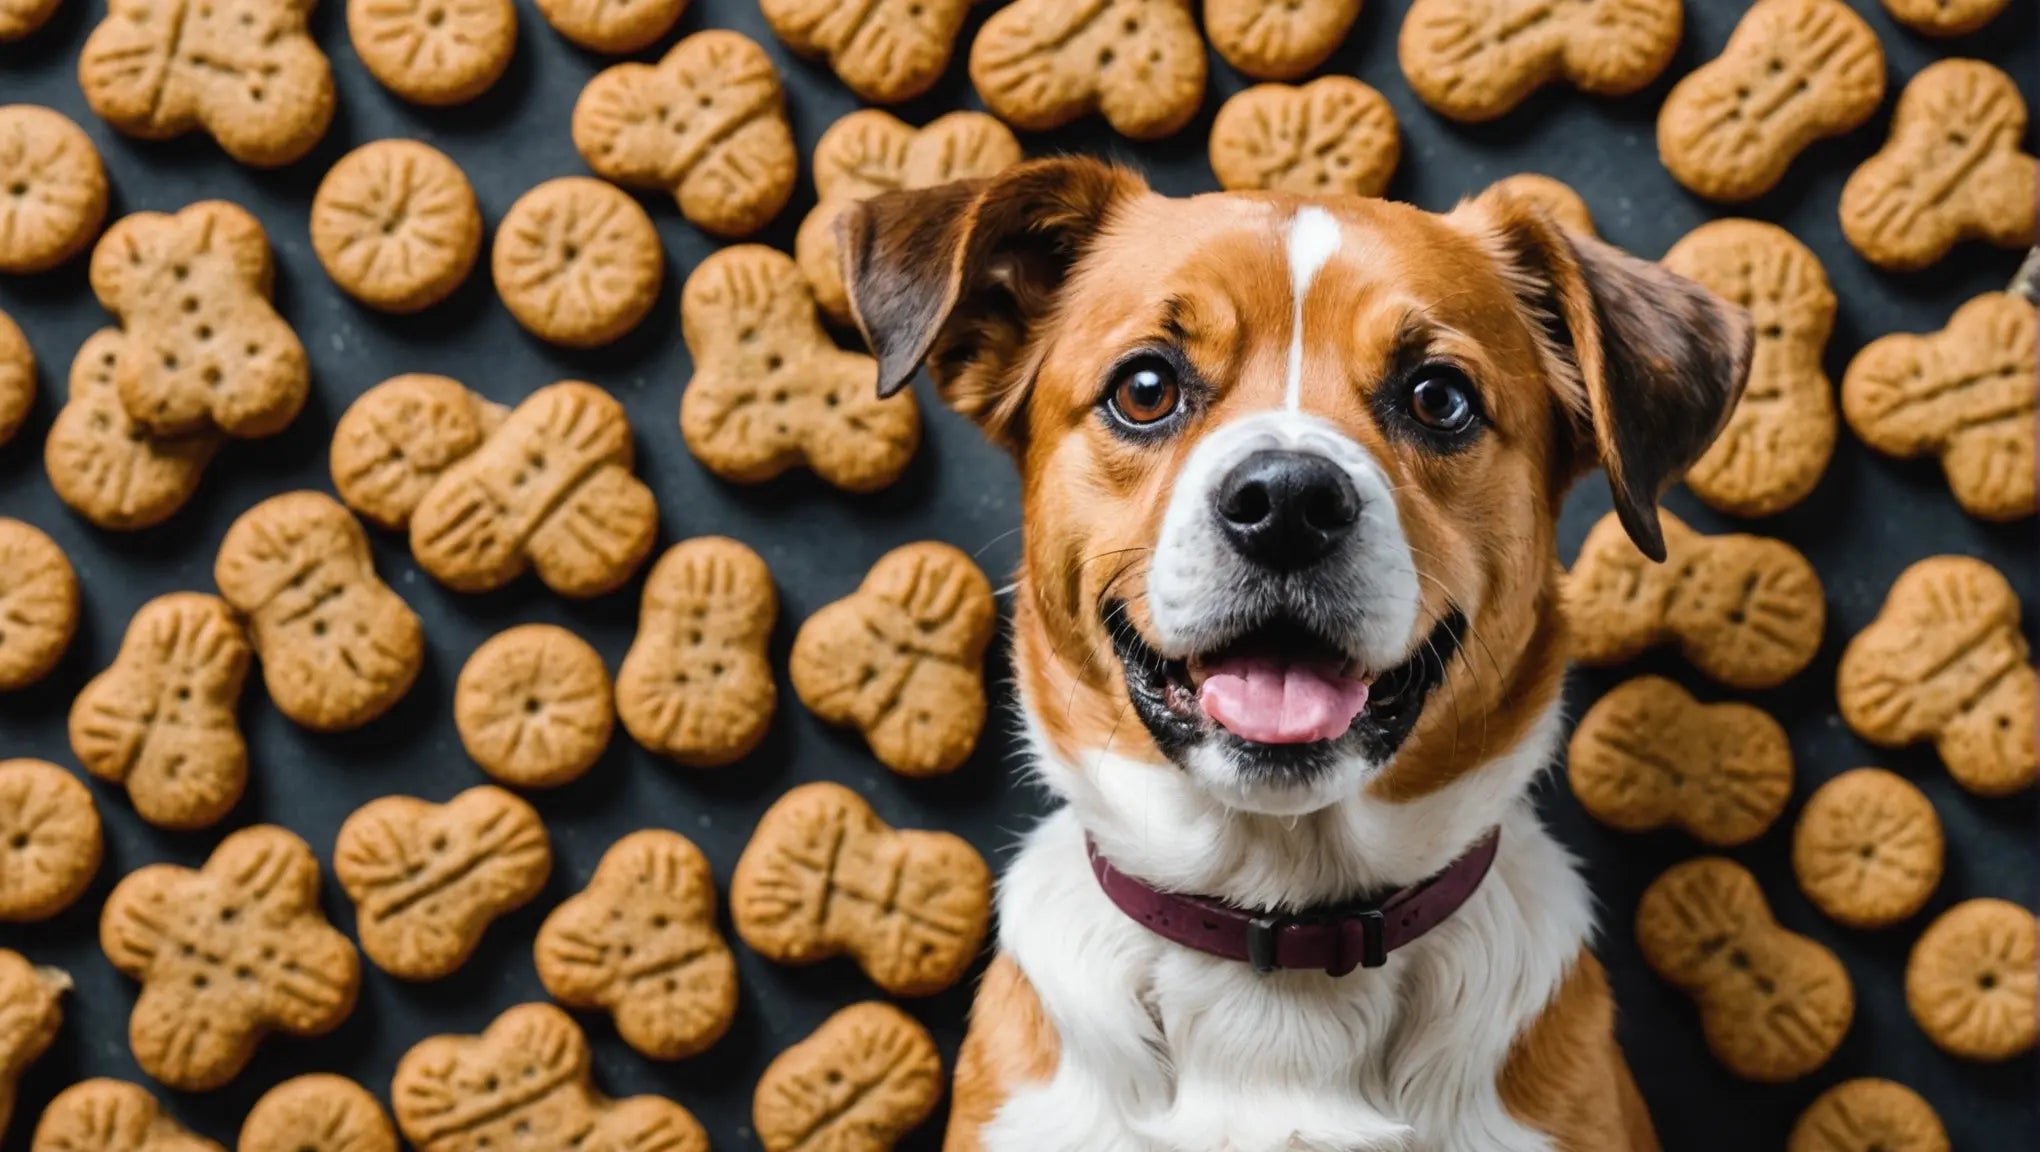 Treat Your Dog with Soft and Delicious Treats